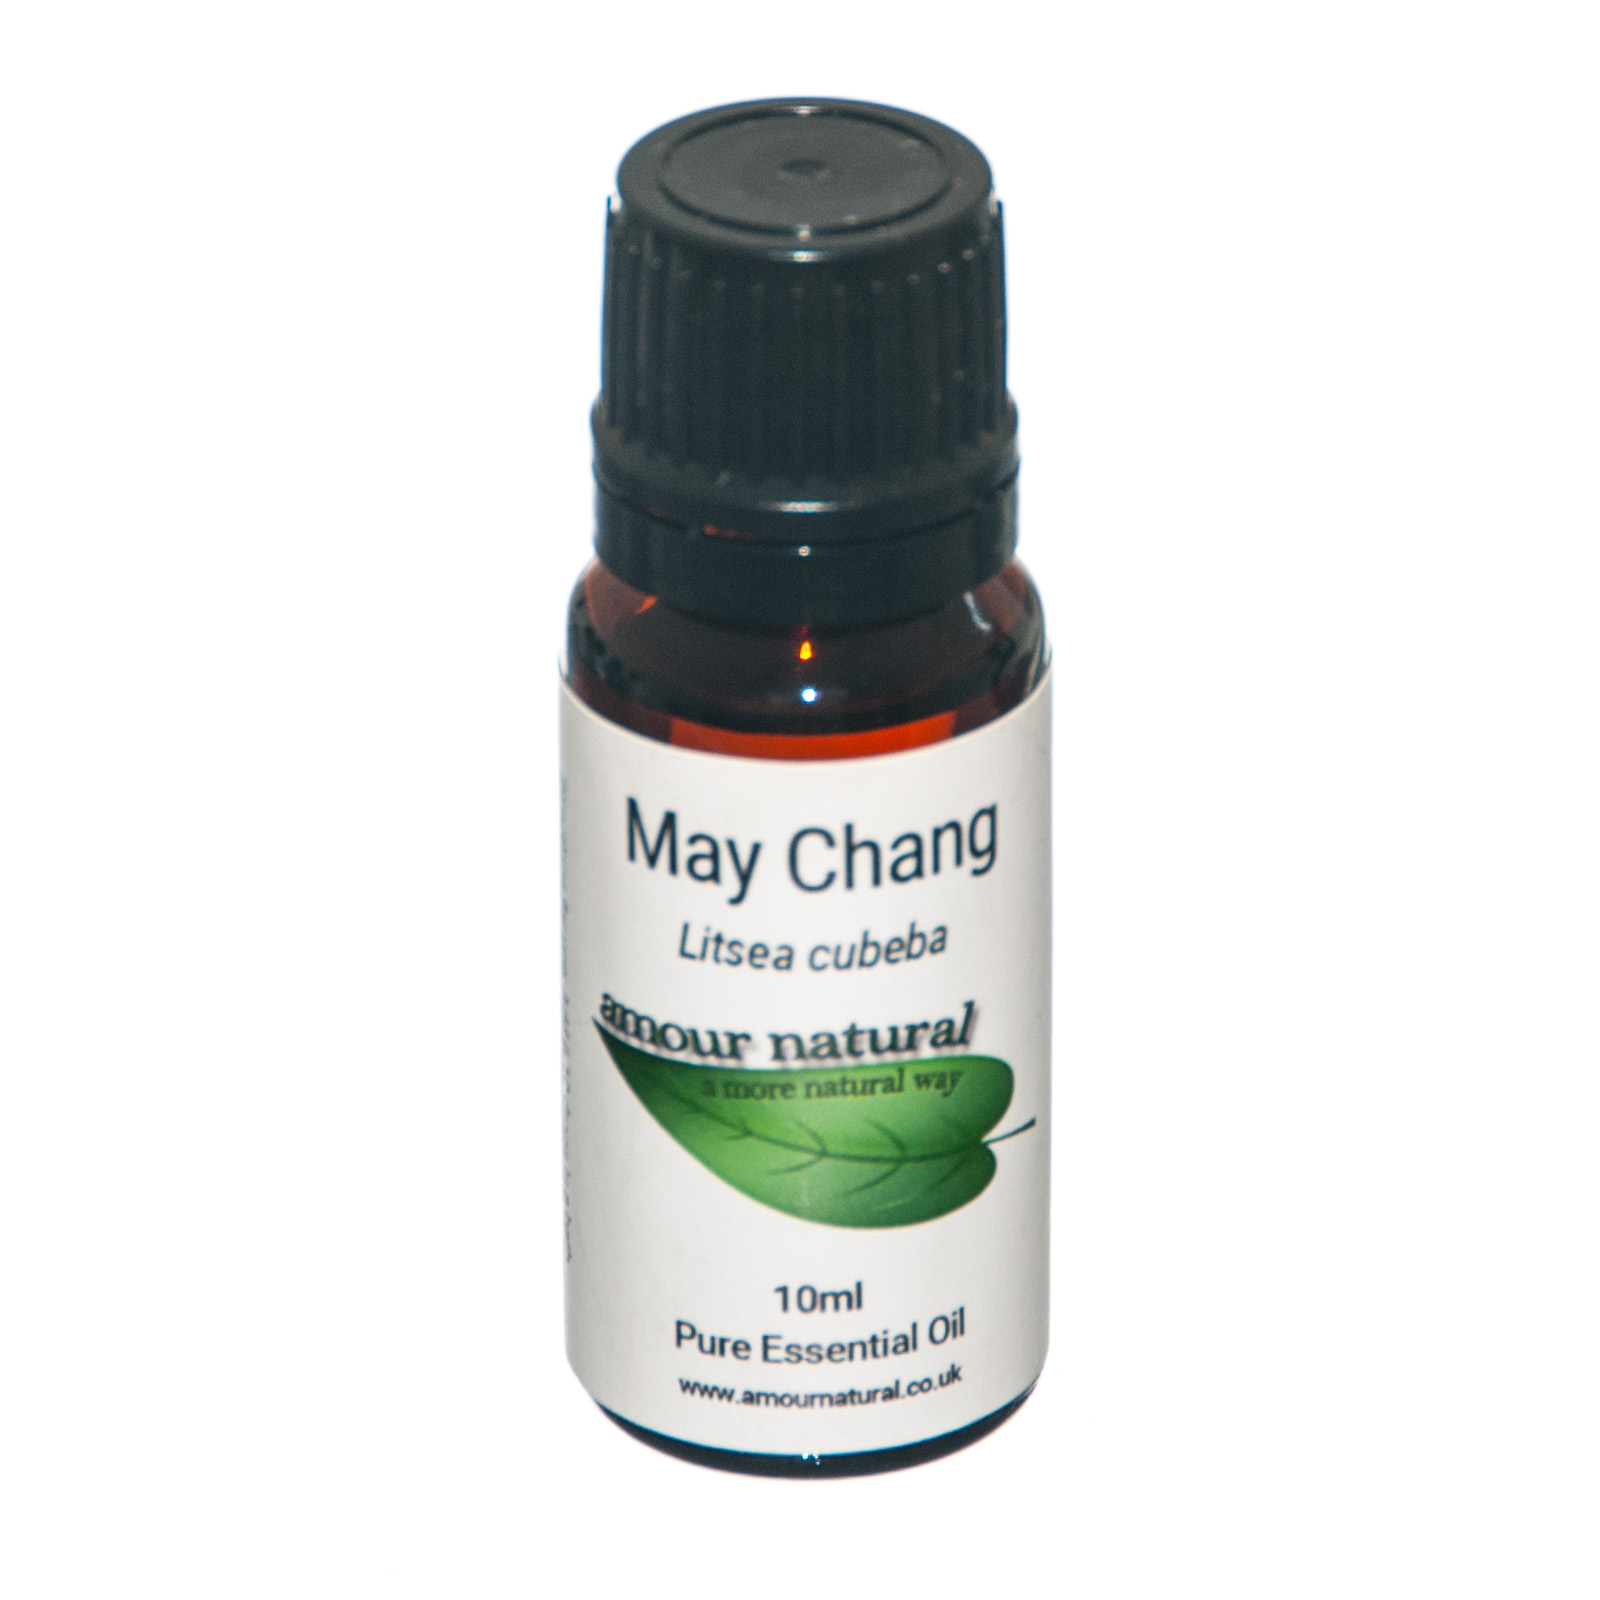 May chang essential oil